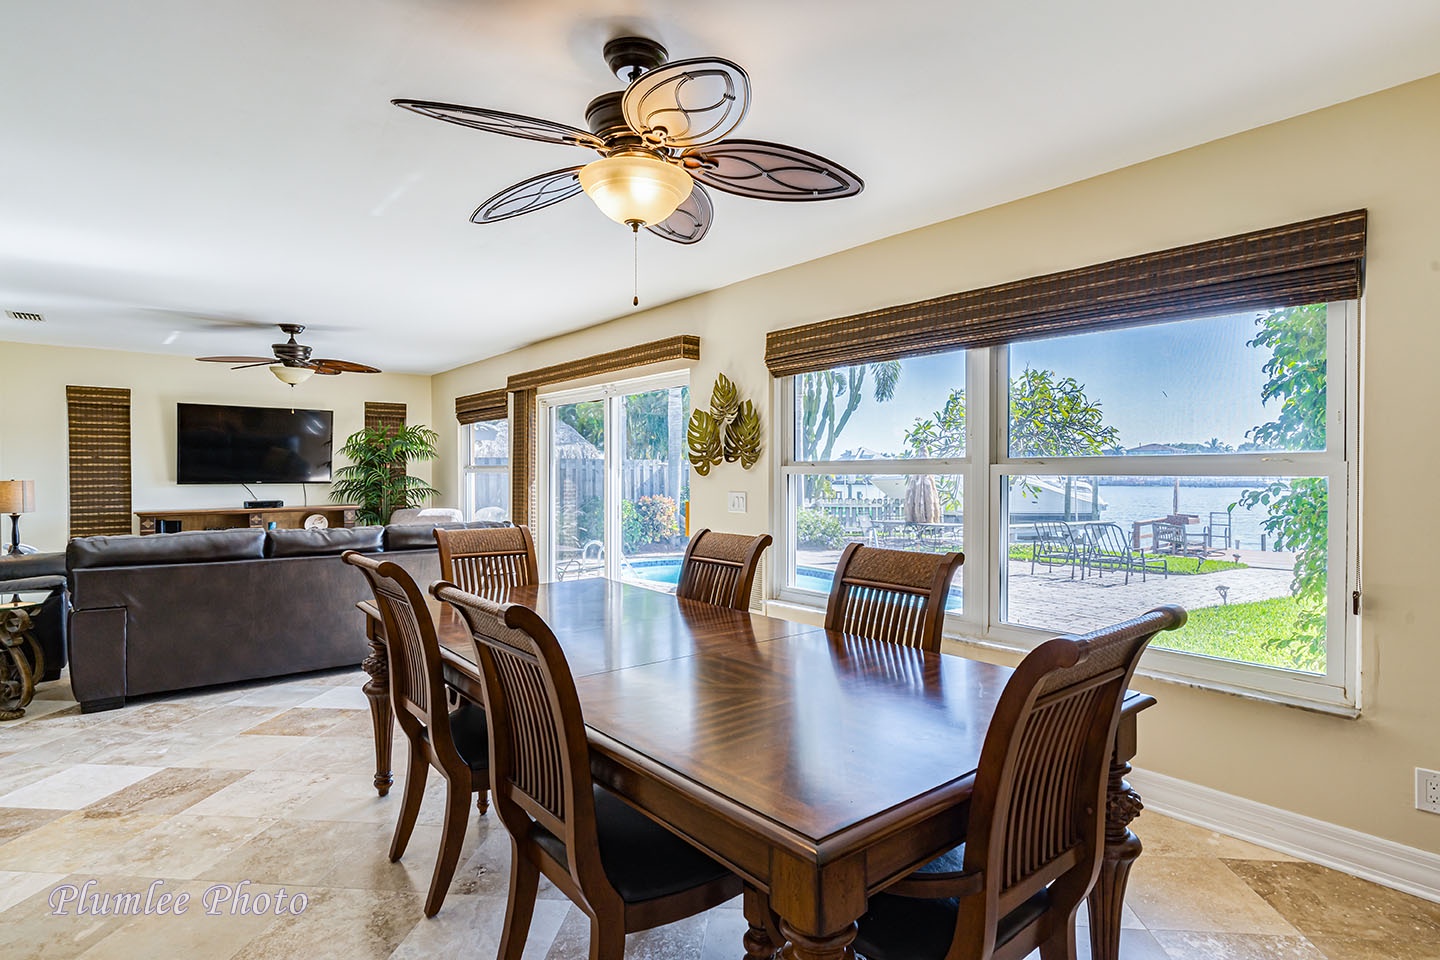 Large family dining table with water view